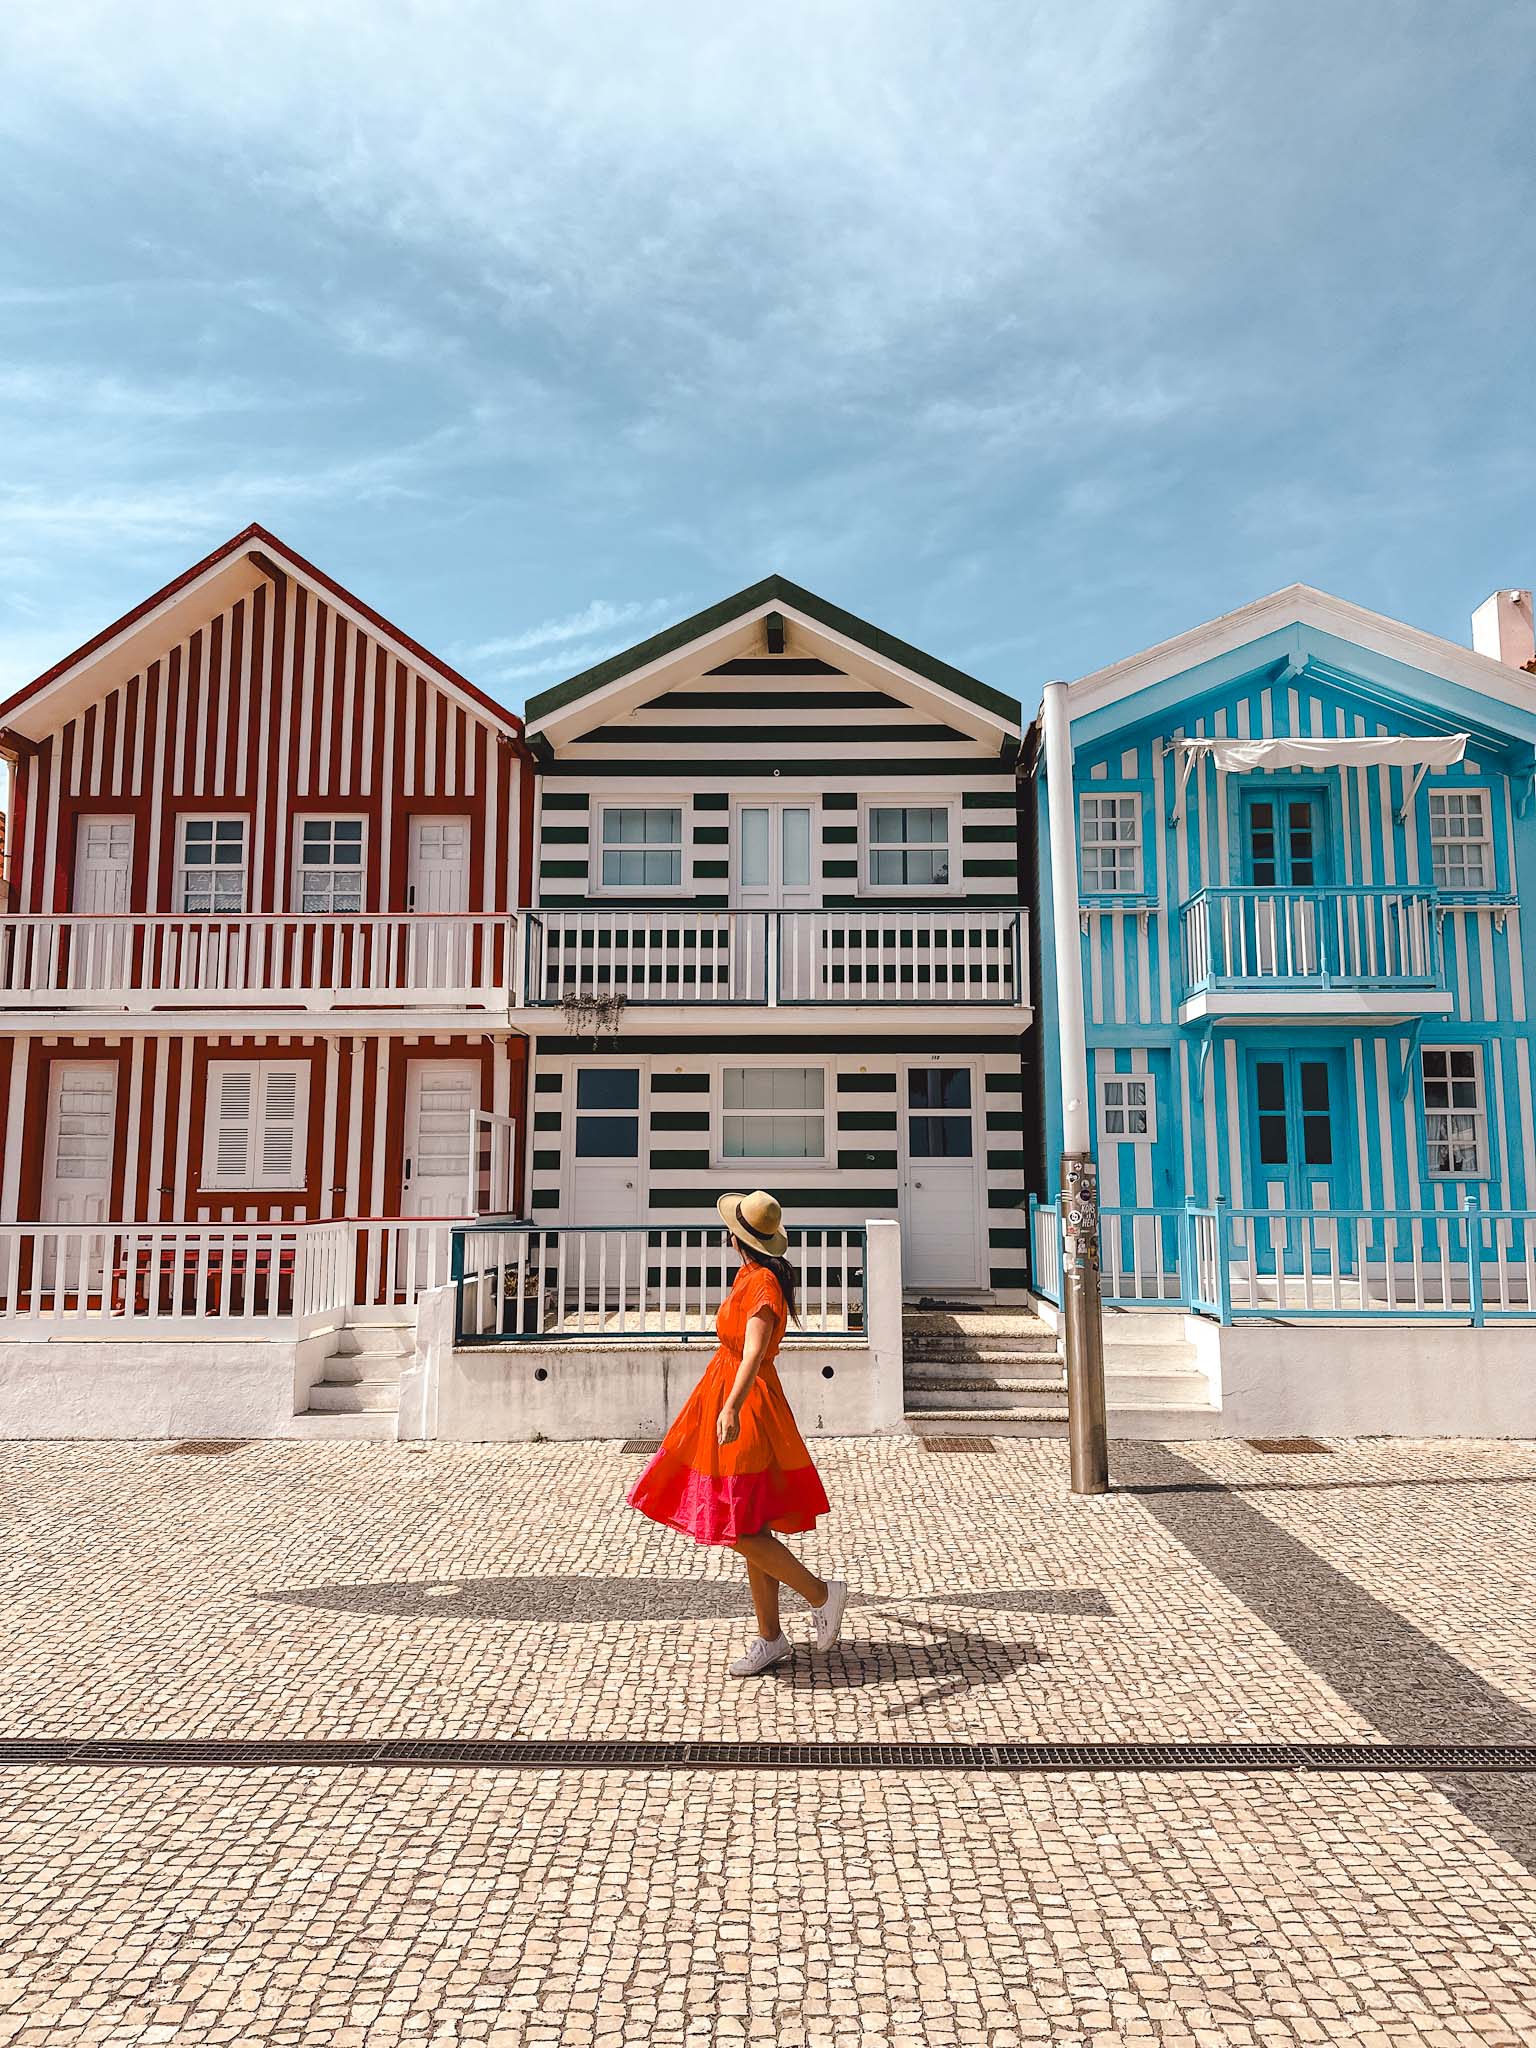 Things to do in Aveiro, Portugal - striped houses in Costa Nova